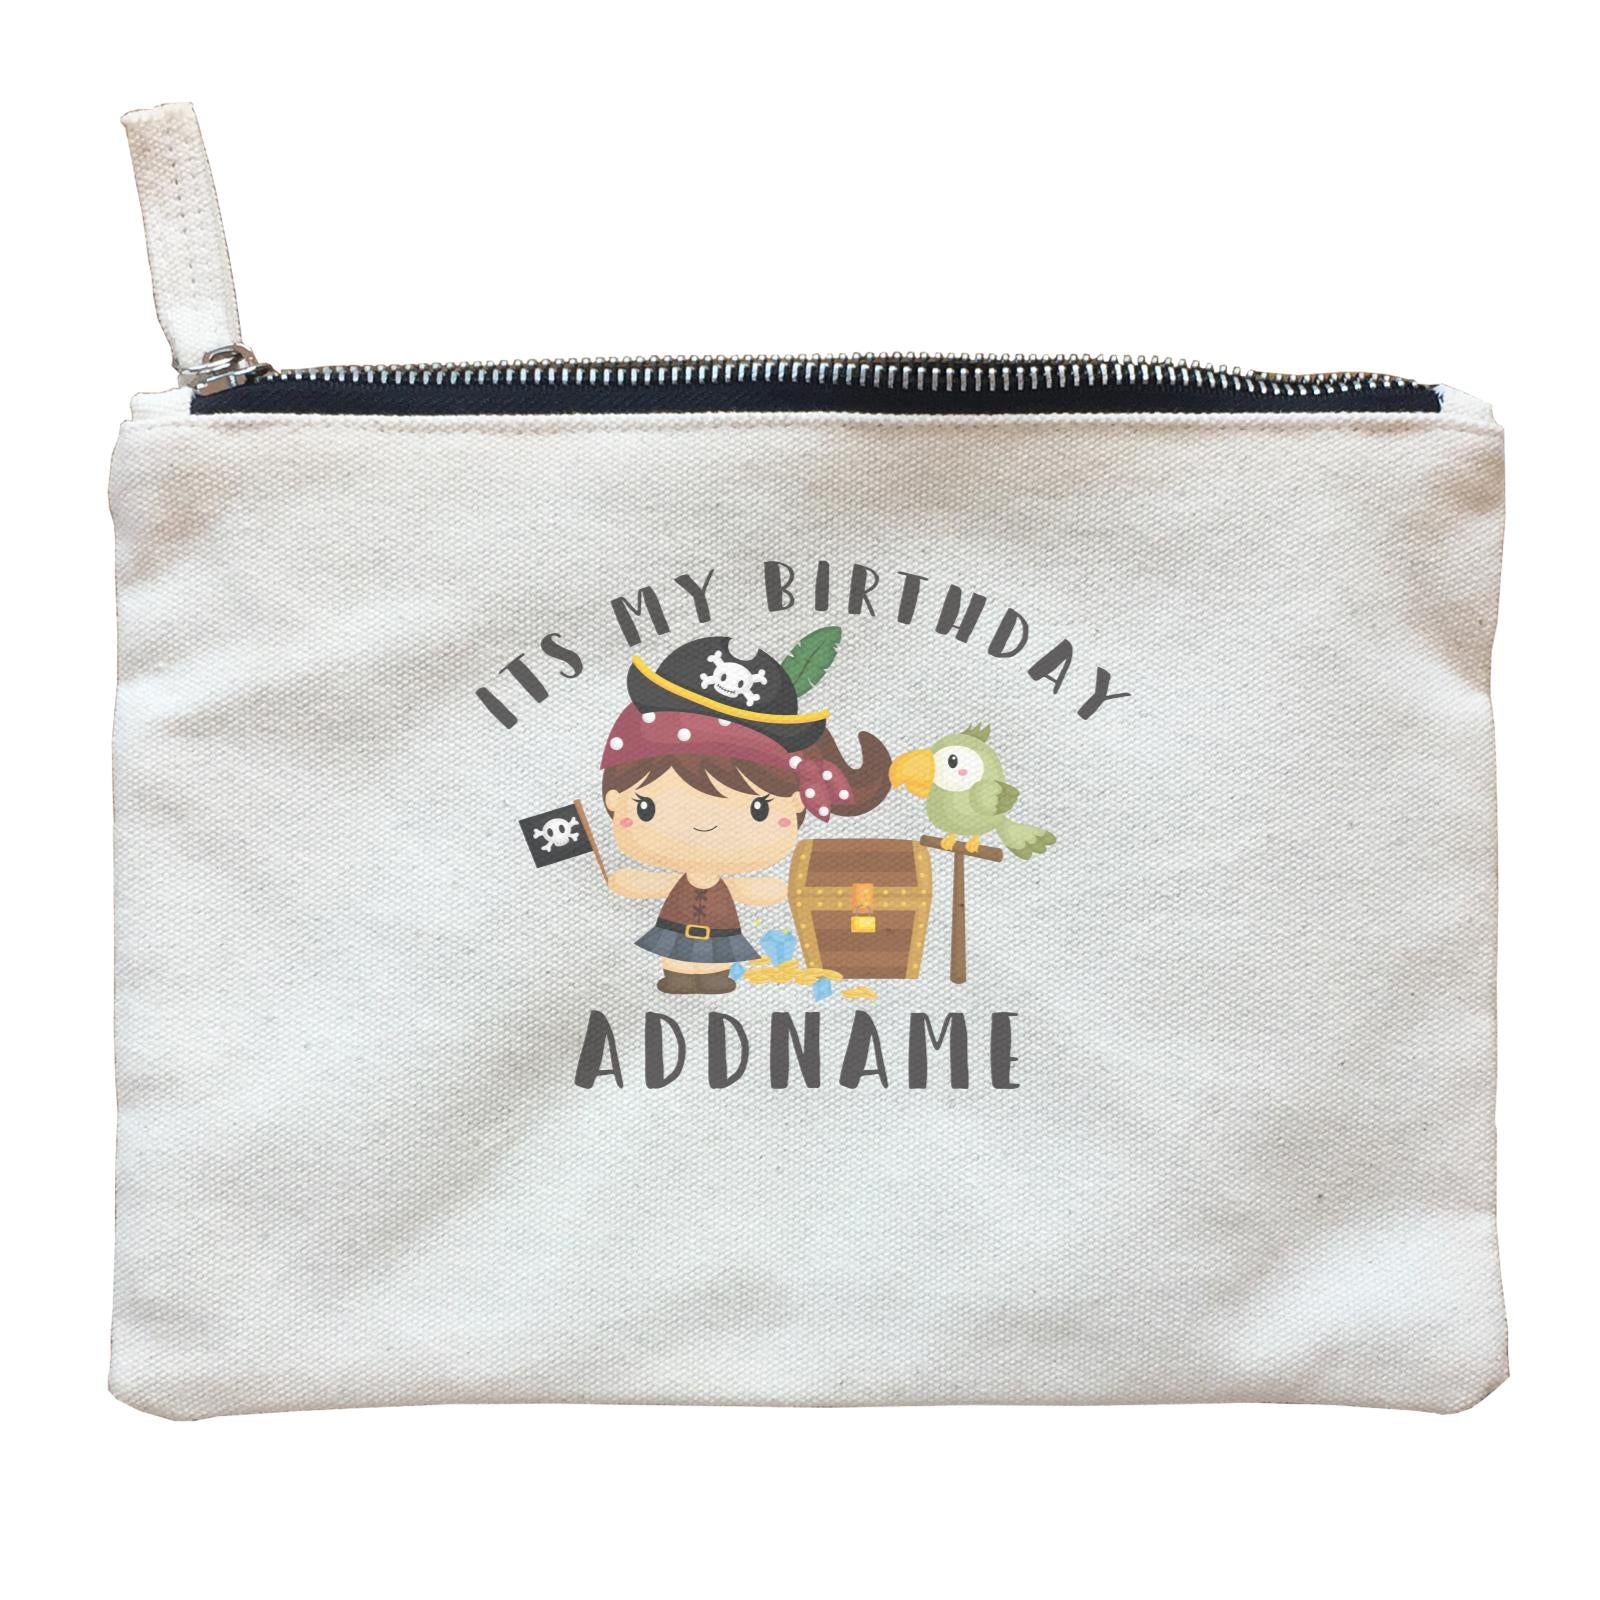 Birthday Pirate Happy Girl Captain With Treasure Chest Its My Birthday Addname Zipper Pouch